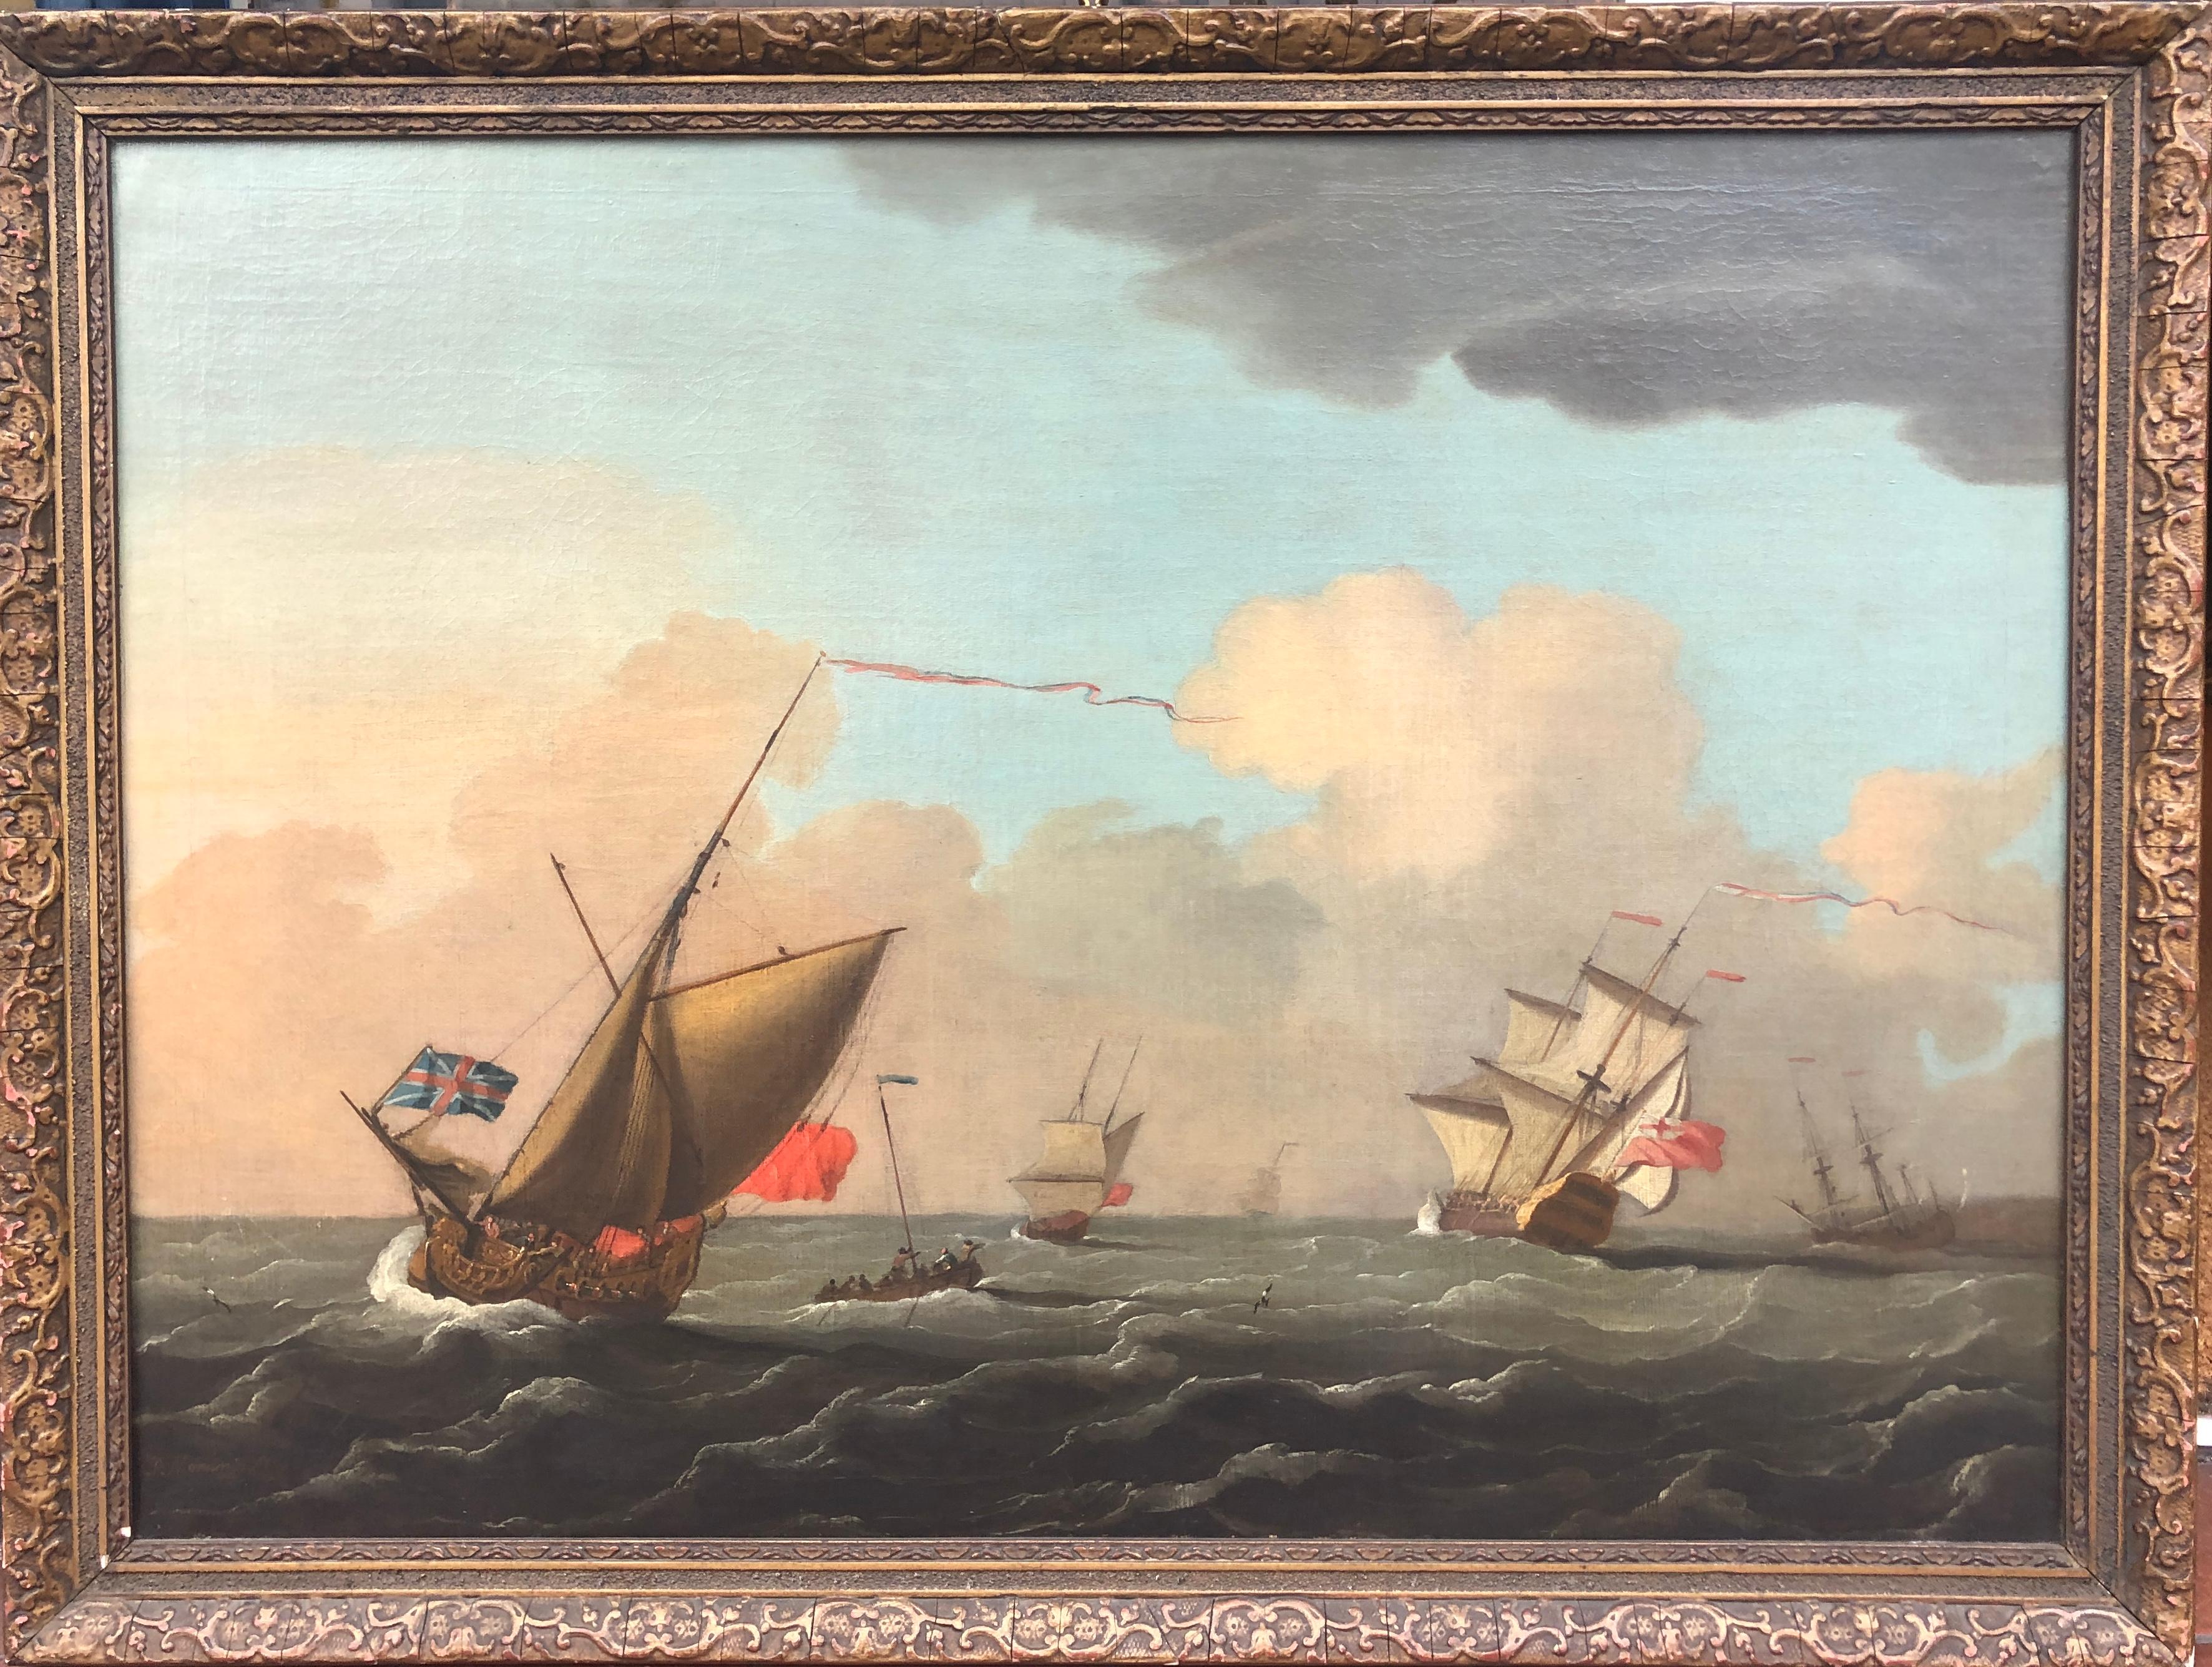 18th century ships for sale